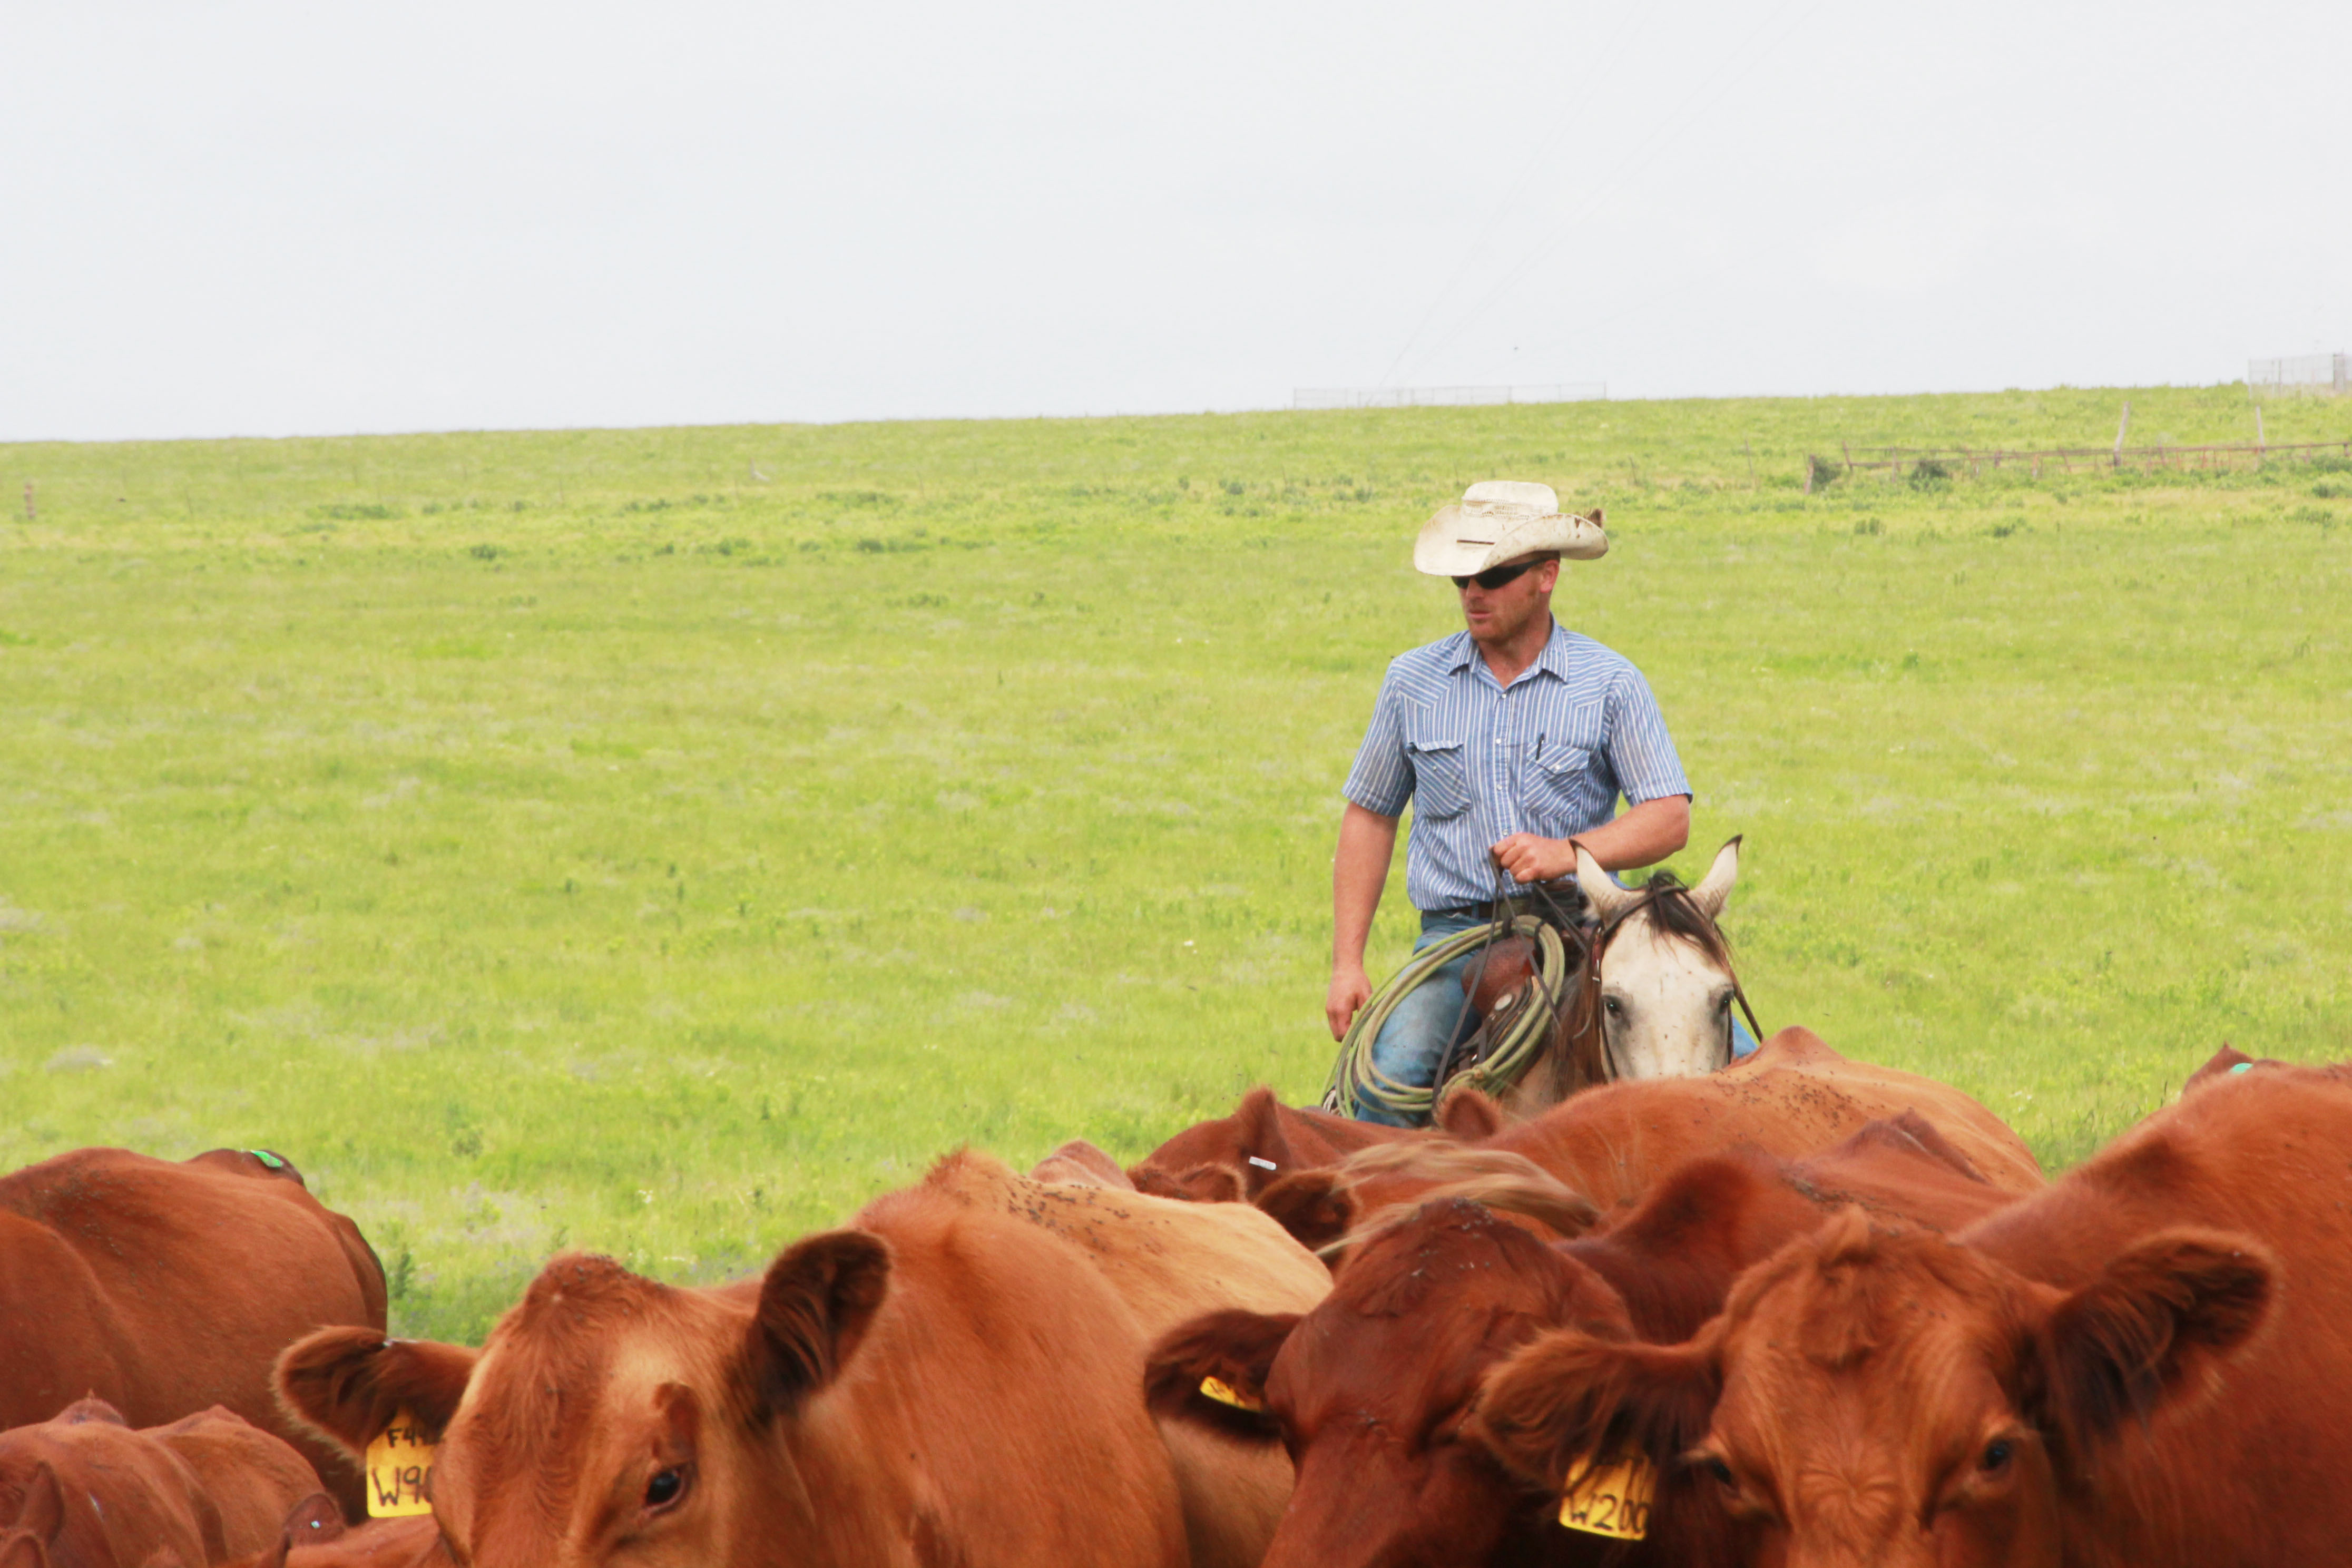 Glenn Selk Says Its A Good Time to Update the Ranch Record Keeping System 